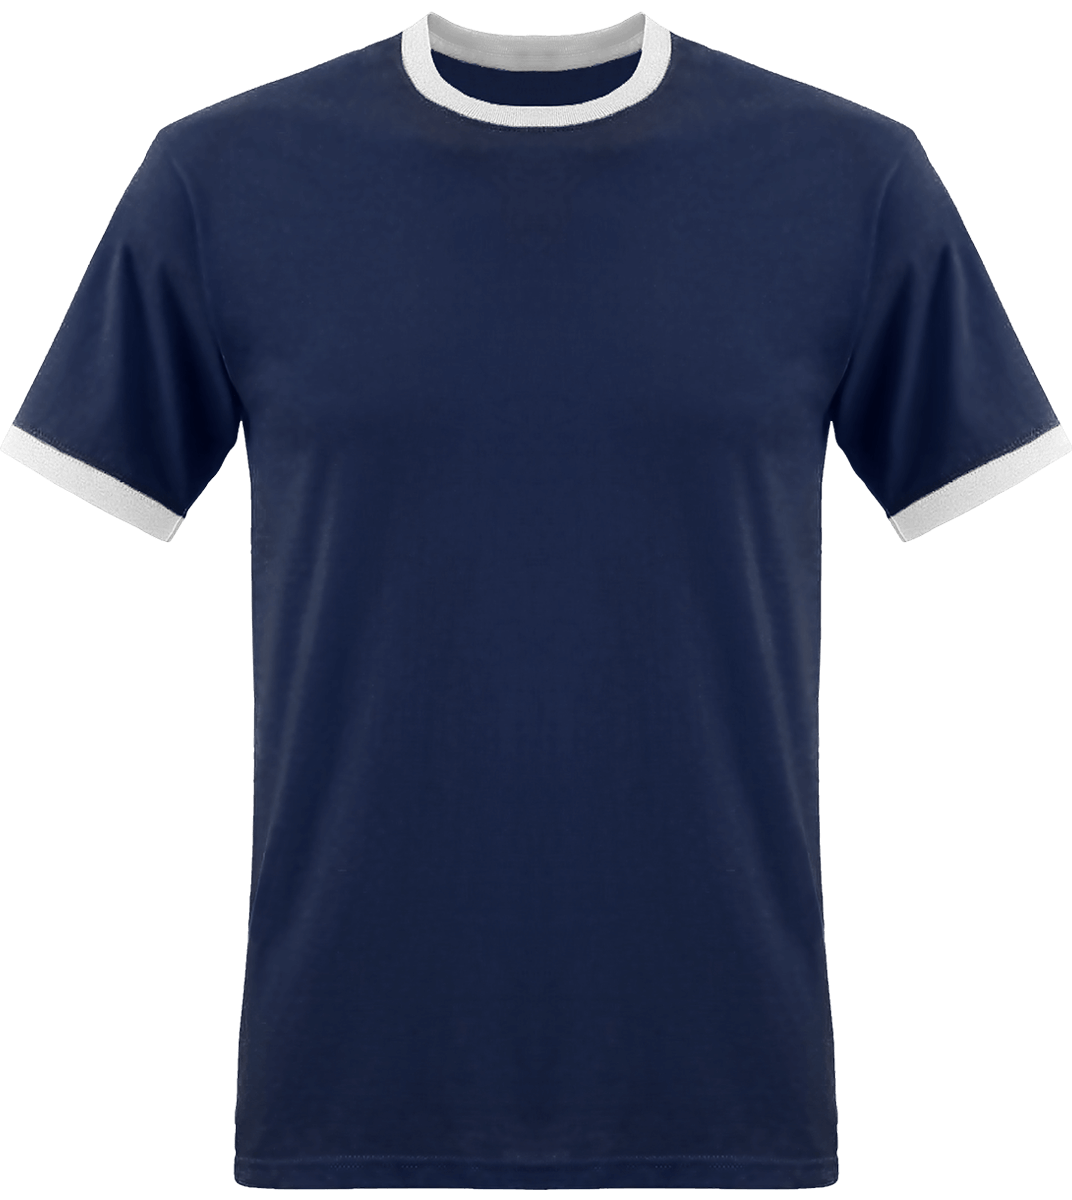 Personalised Tee Shirt Men contrasted stitches | Tunetoo Navy / White